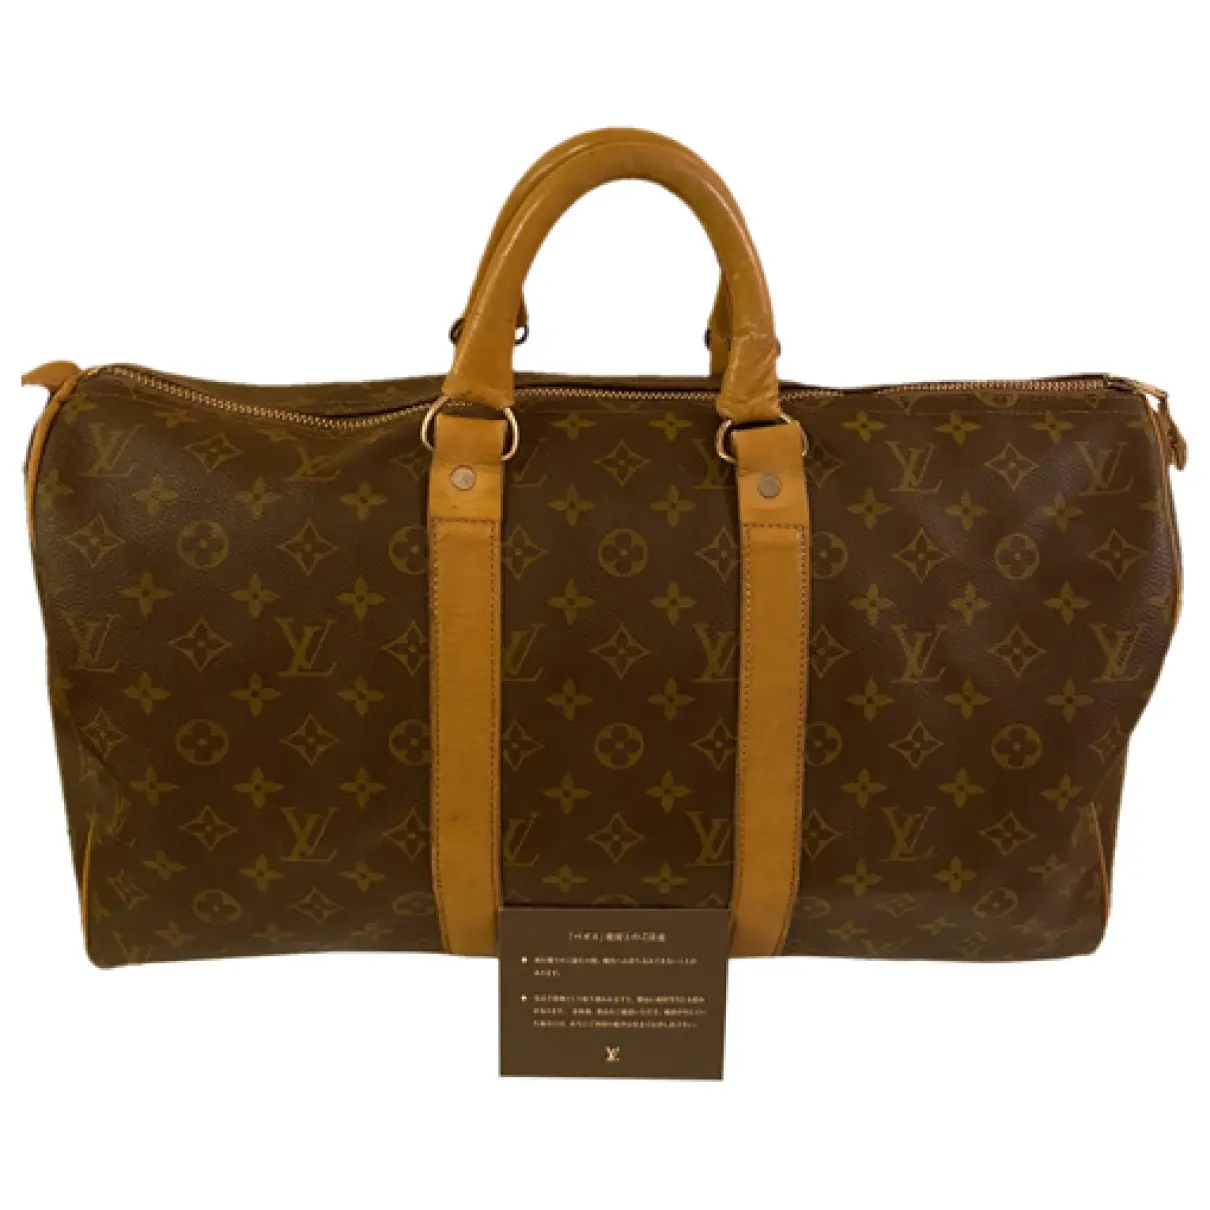 Louis Vuitton Clear Bags & Handbags for Women, Authenticity Guaranteed